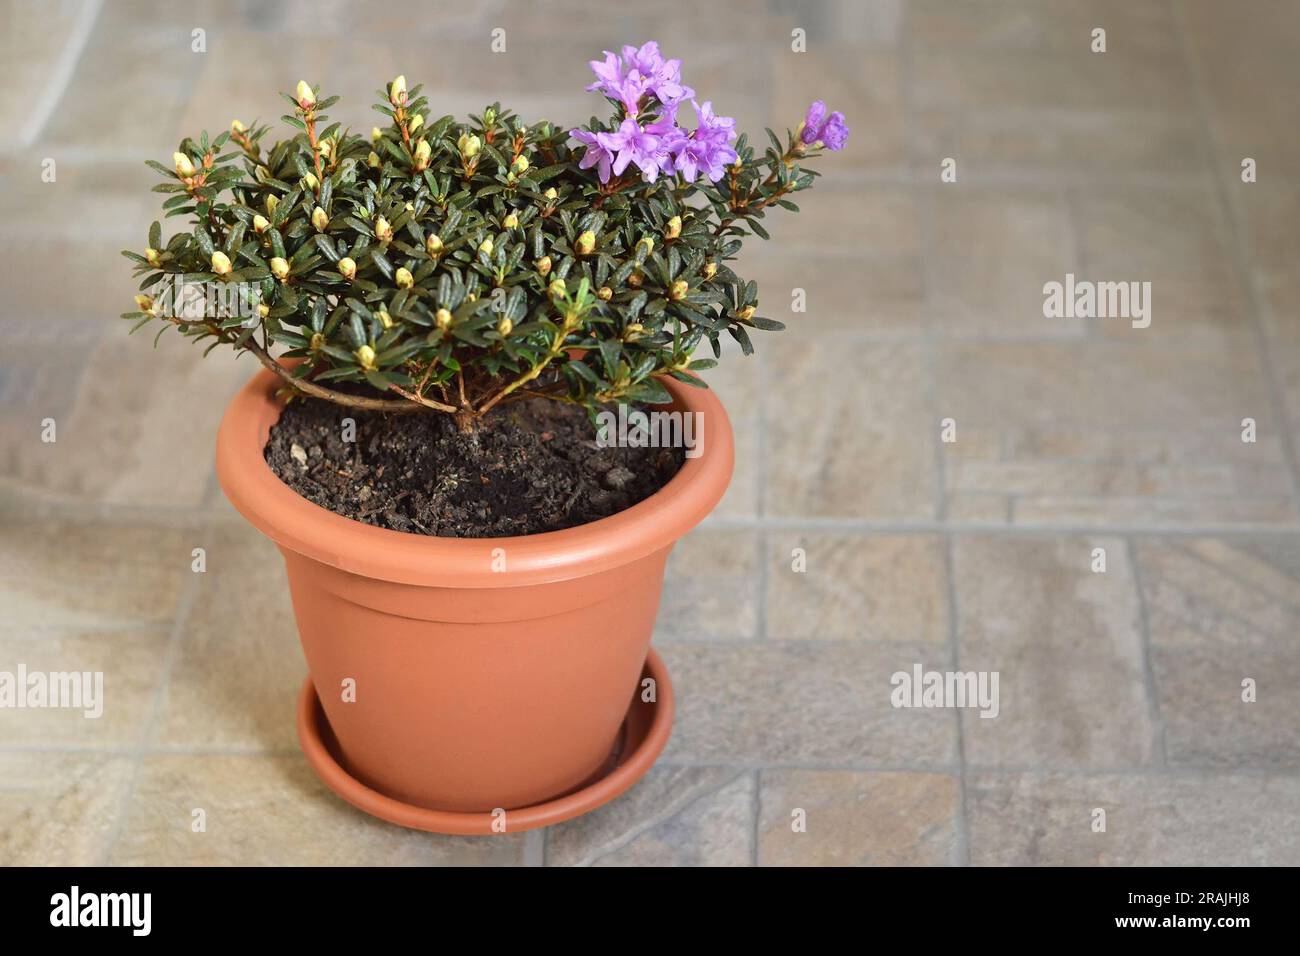 Flowering Chinese dwarf rhododendron planted in the flower pot Stock Photo